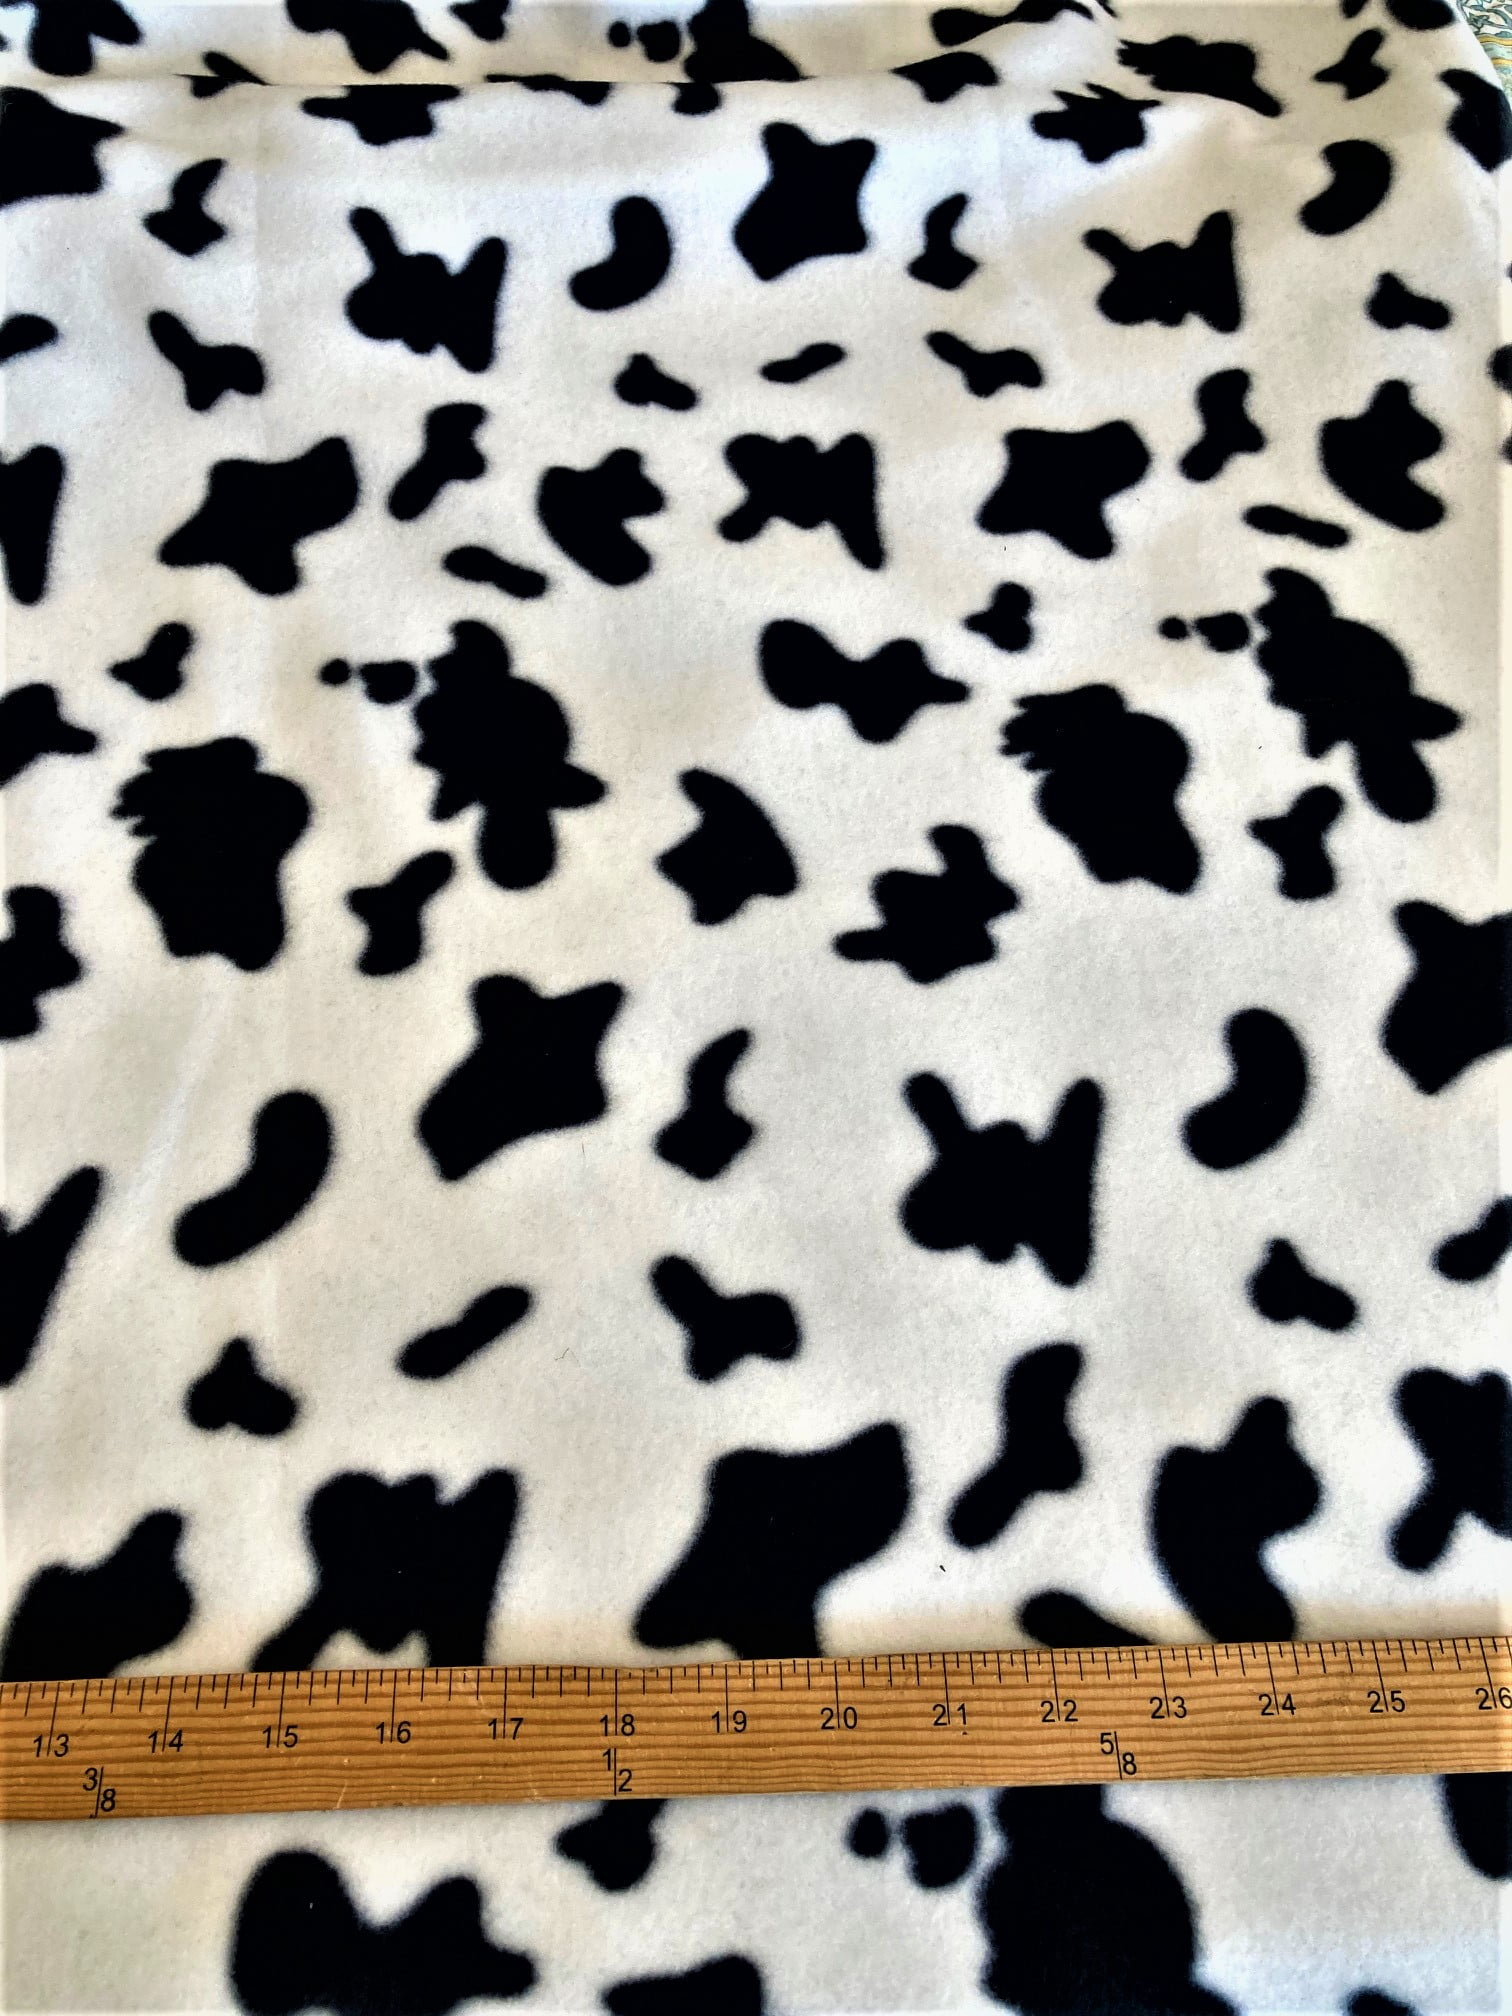 Suede Velvet Cow print fabric Udder Madness Upholstery DEEP COPPER CREAM /  54 Wide / Sold By The Yard